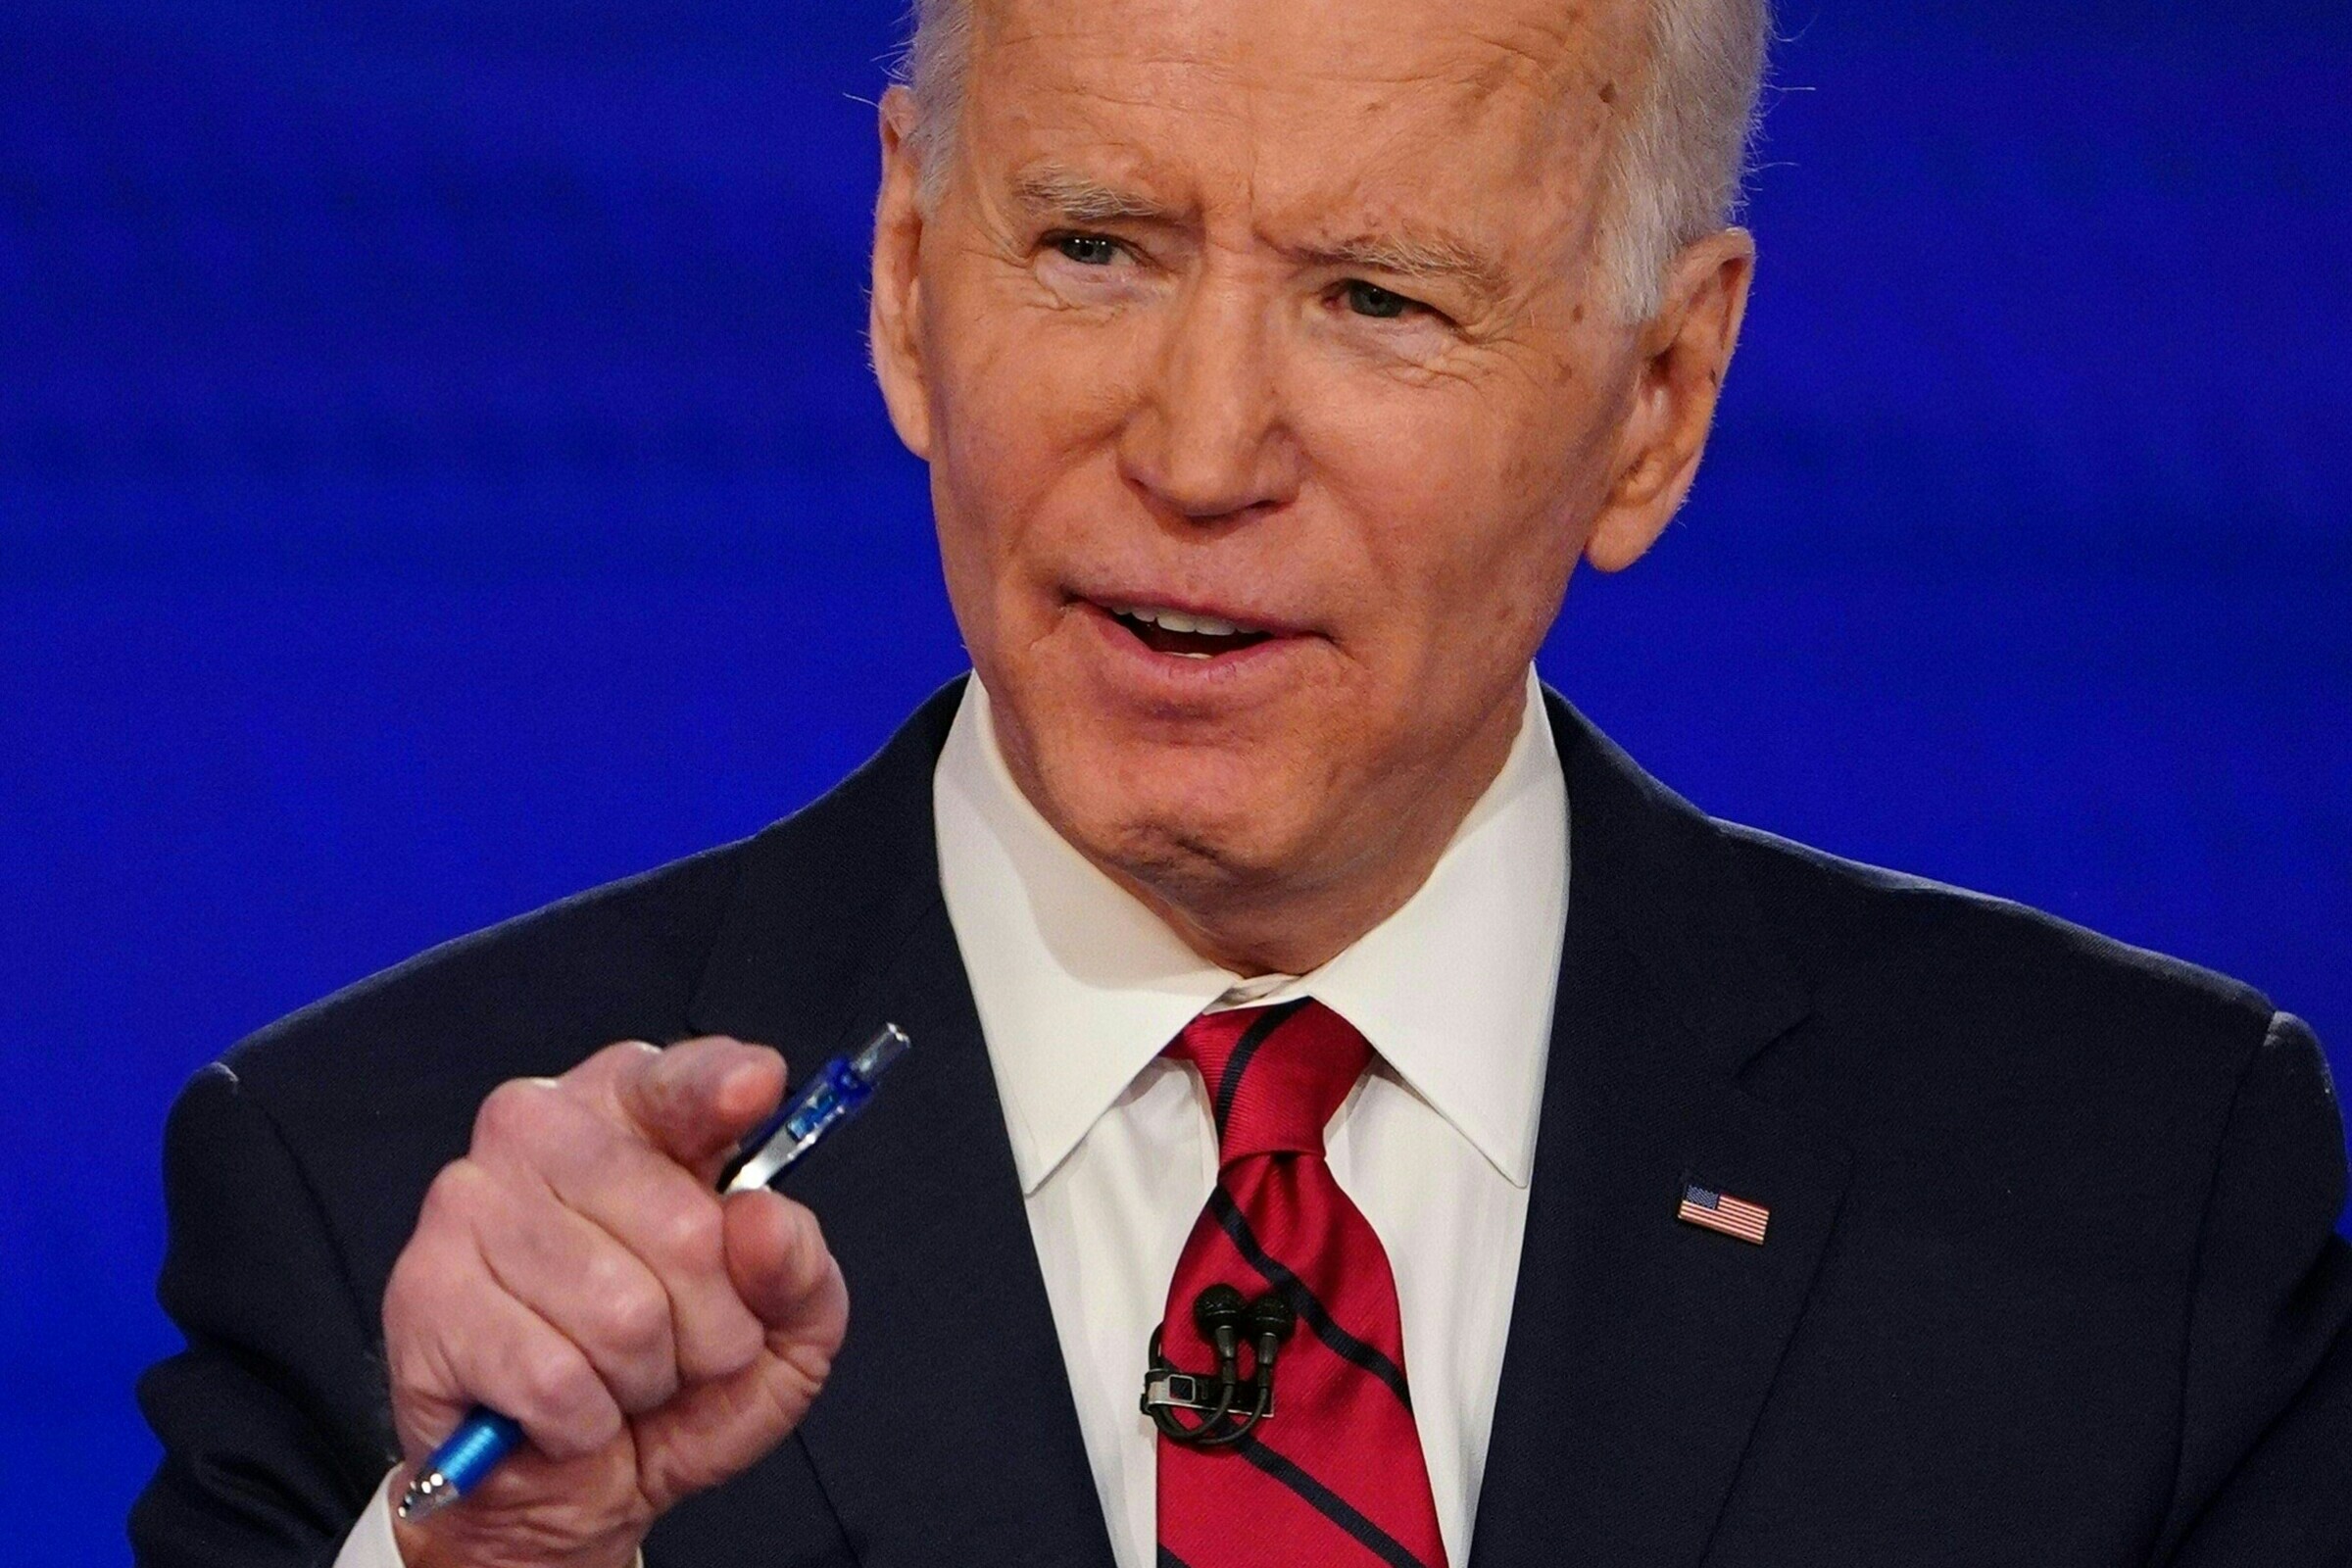 Joe Biden wants to bring young voters to his campaign ...